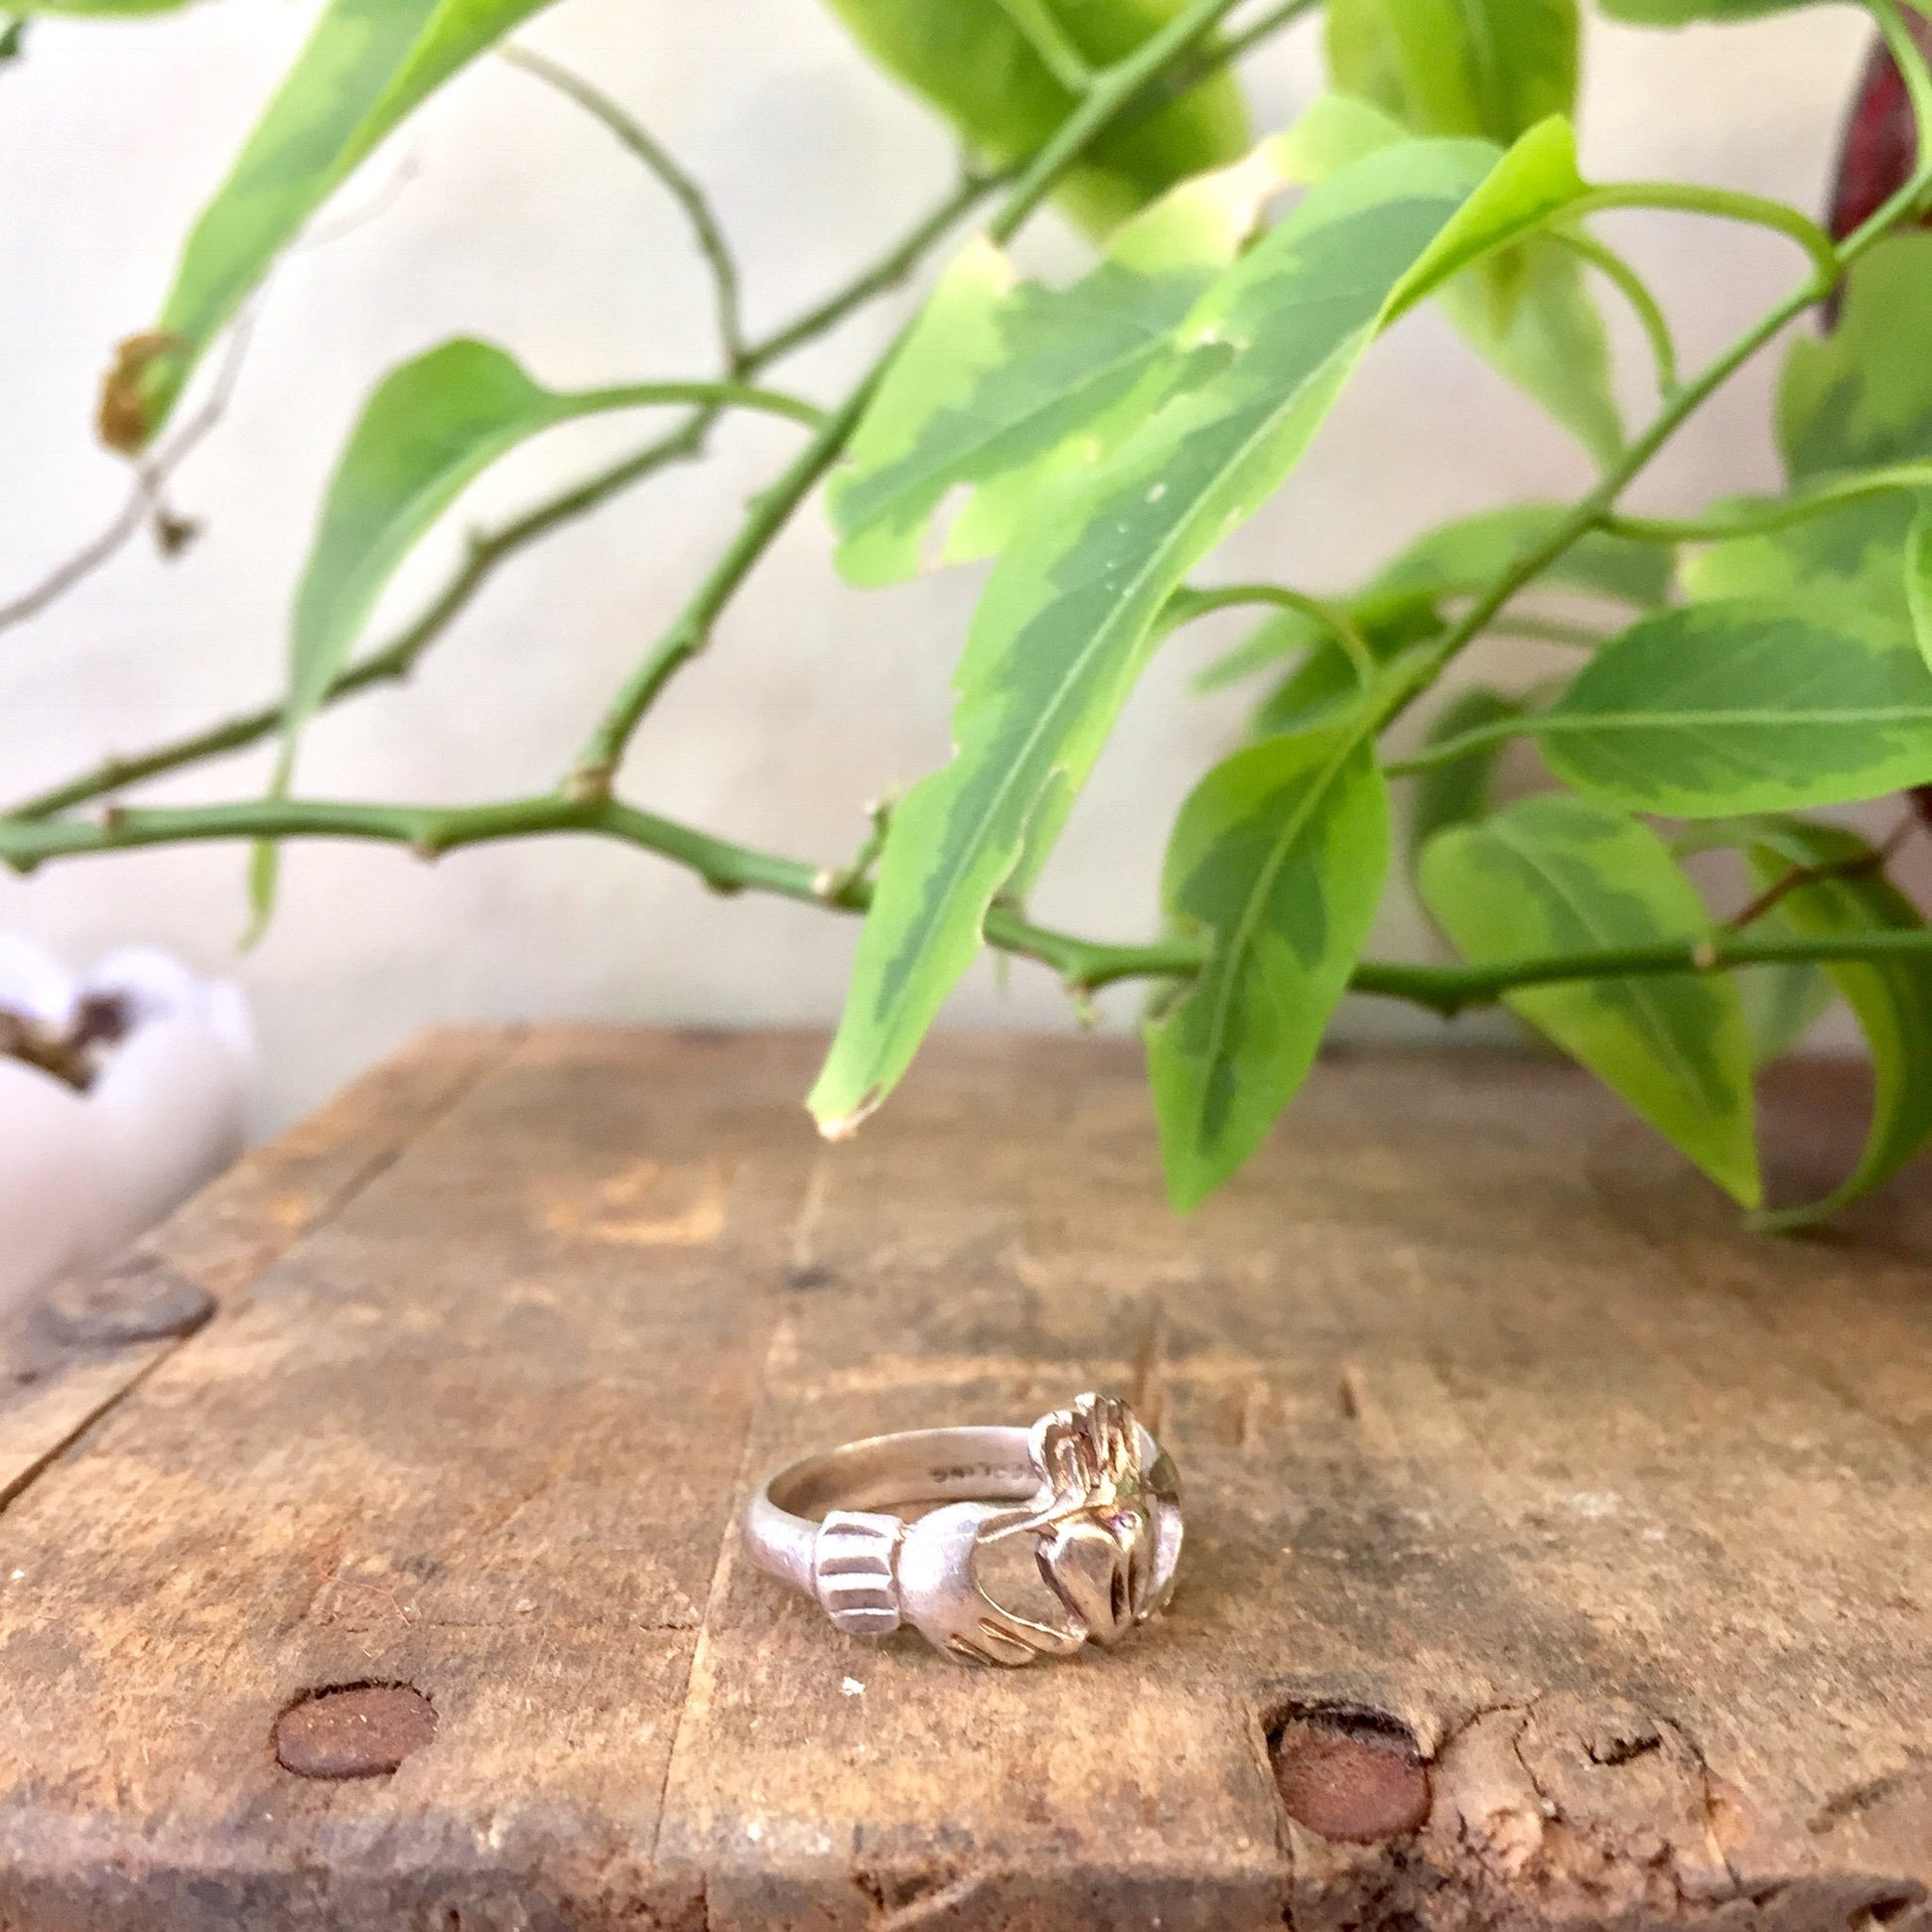 Sterling silver Claddagh ring on wooden surface with green plant leaves in background, Irish Celtic jewelry gift idea for her